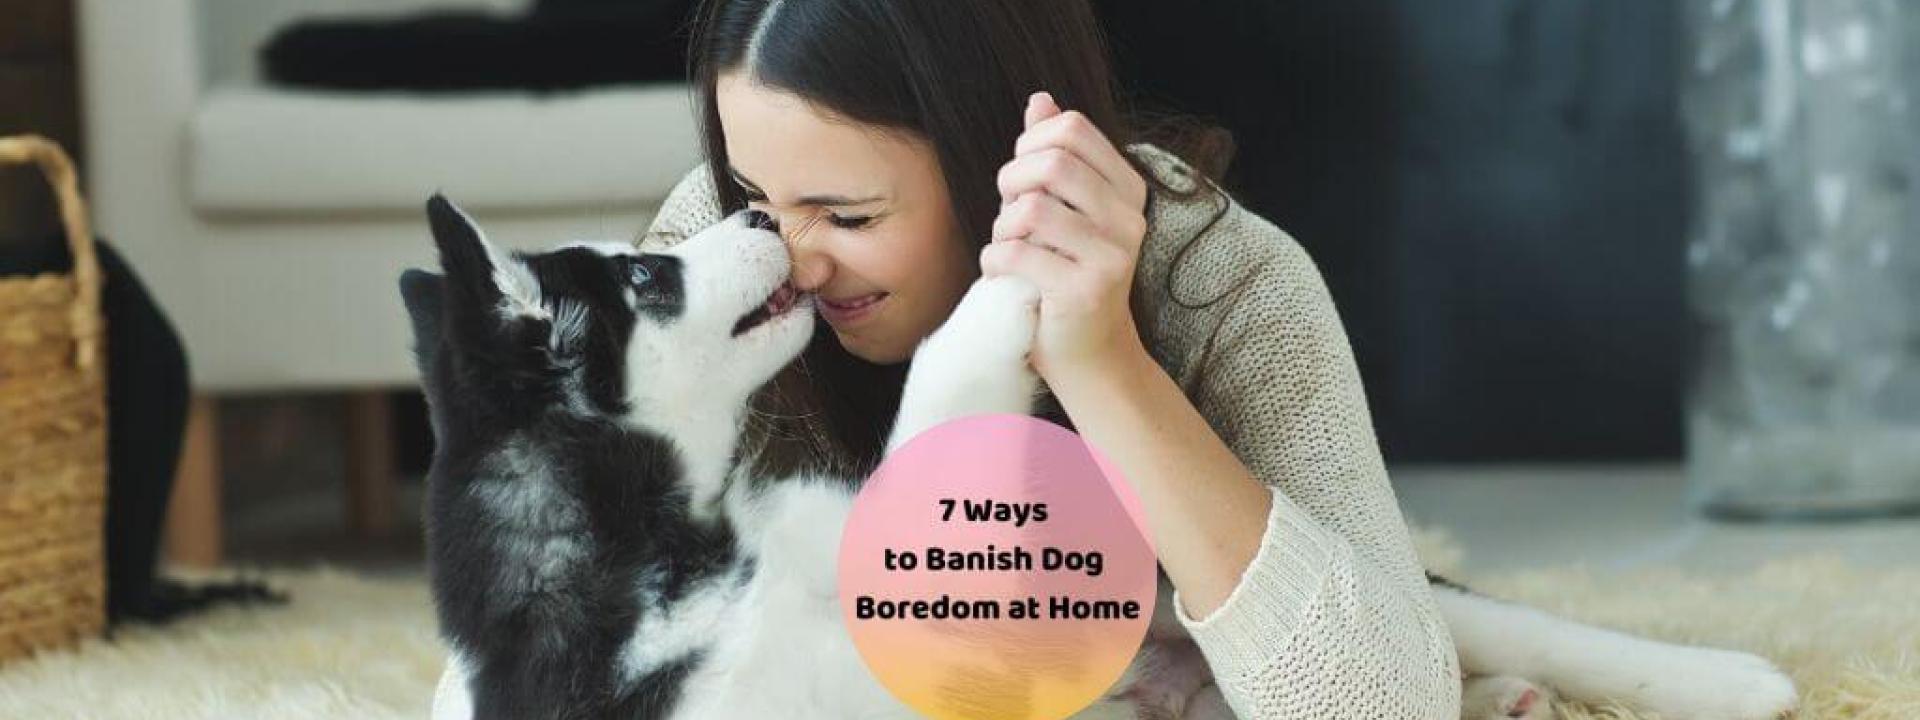 ways to play with your dog at home